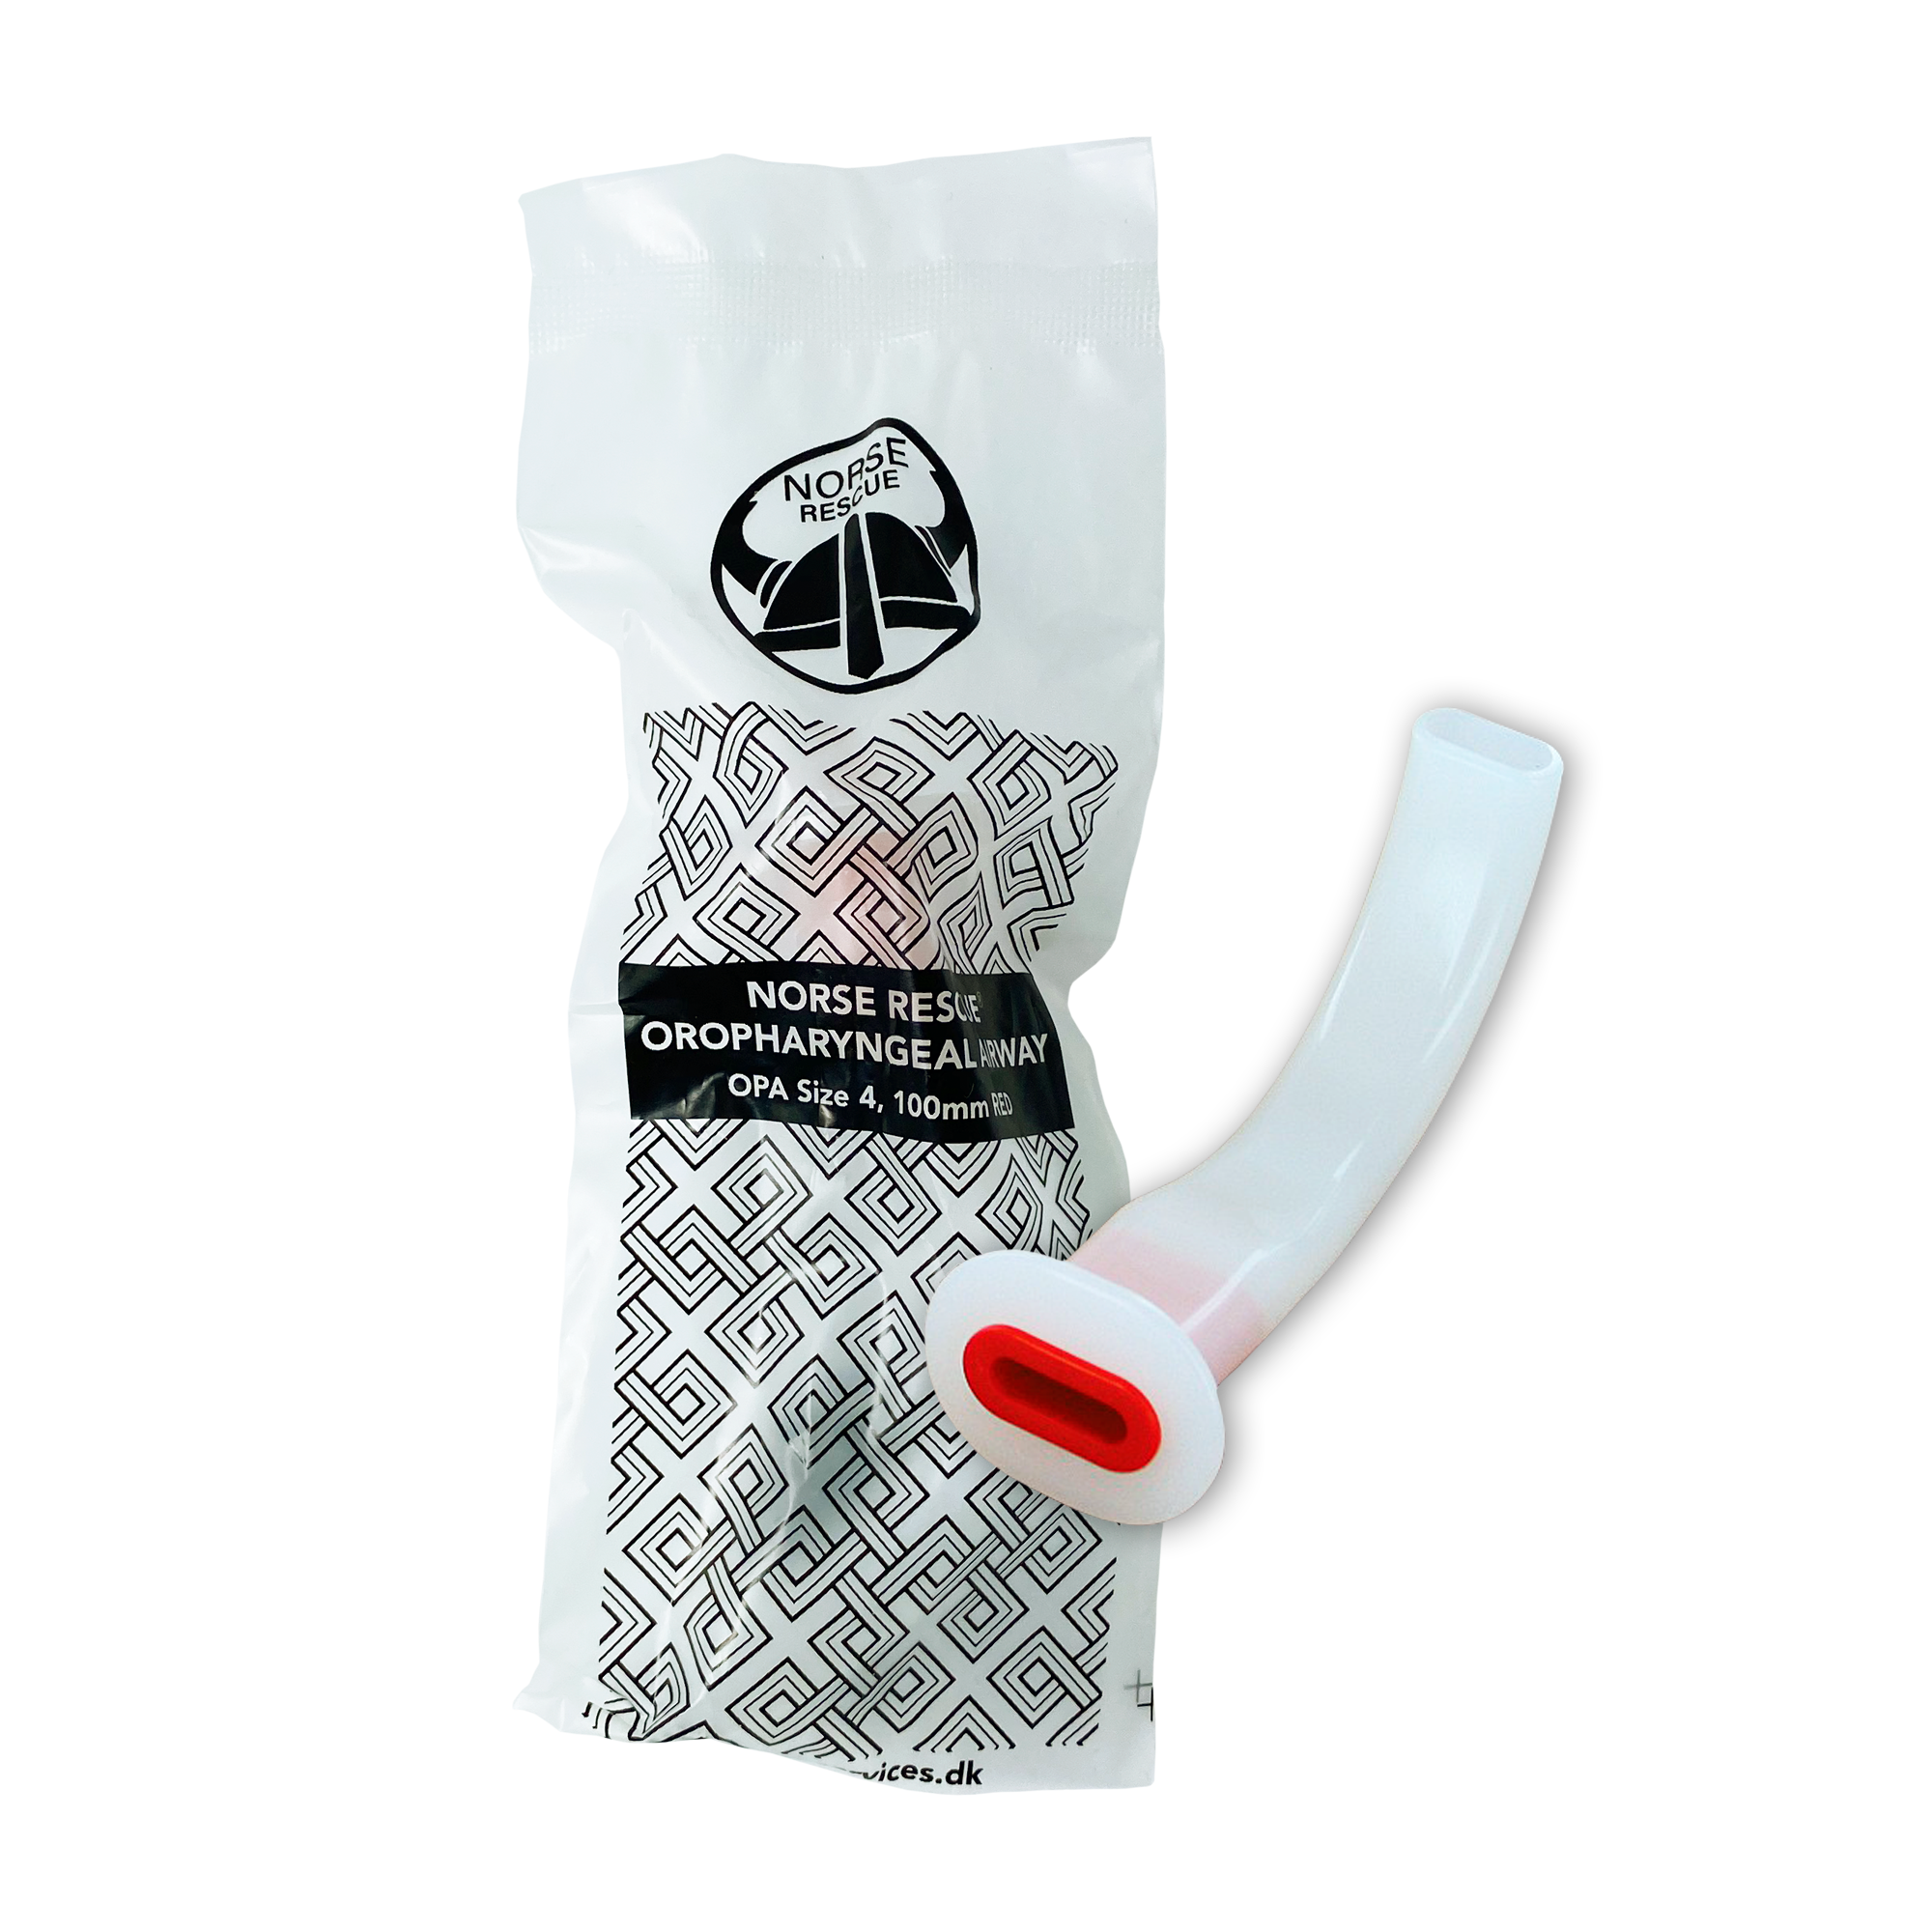 NORSE RESCUE® Oropharyngeal Airway (OPA)